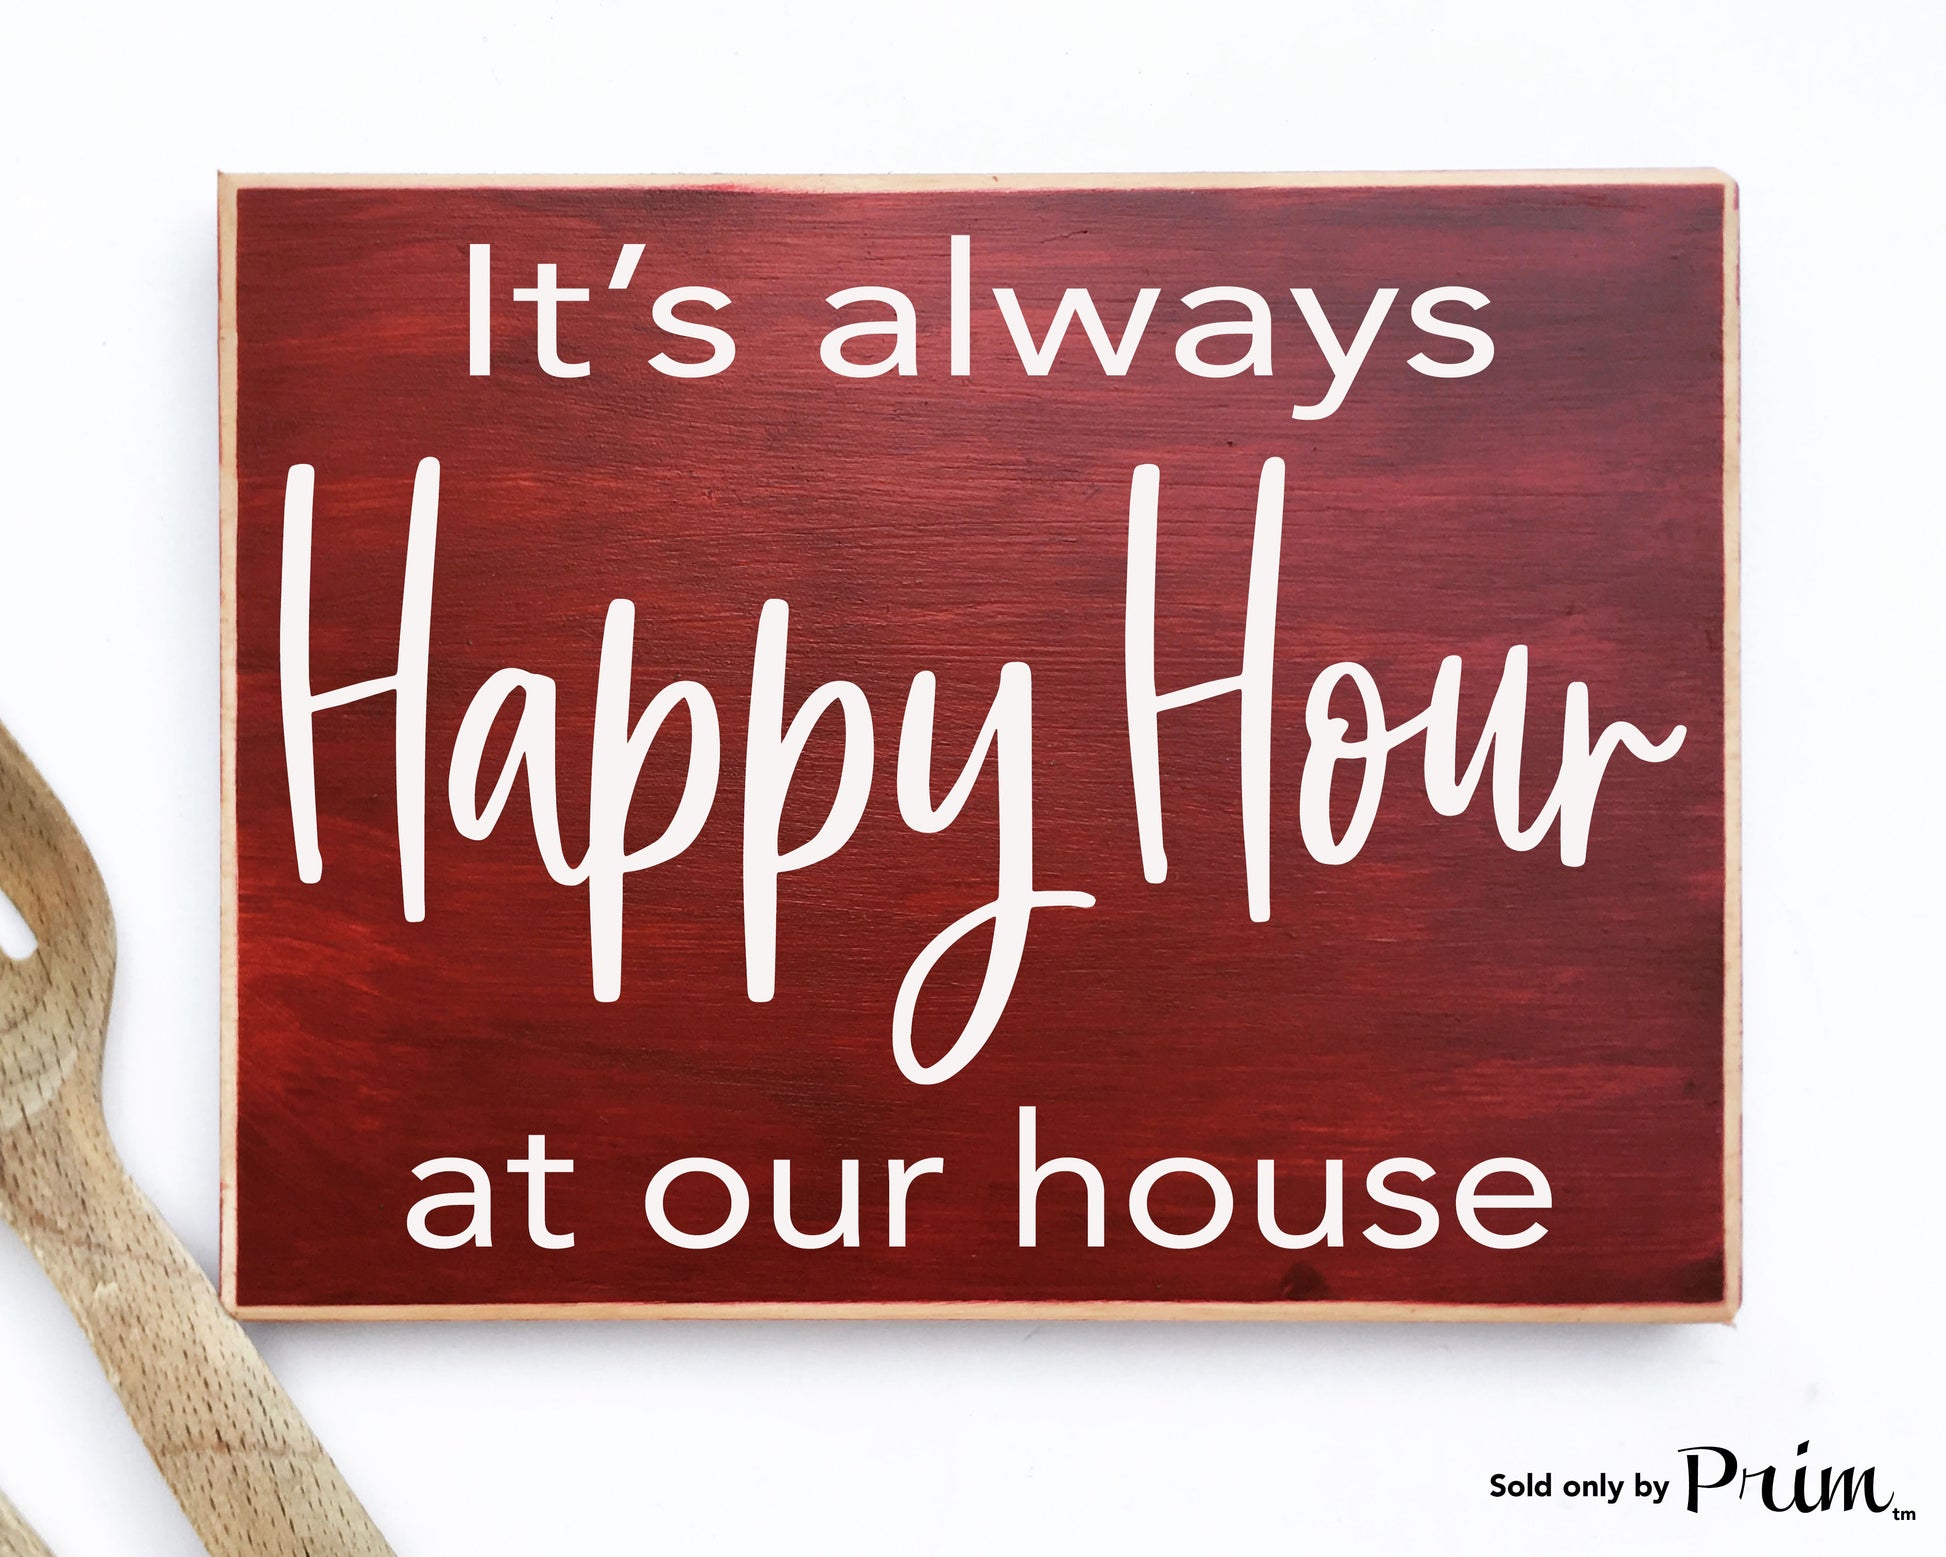 It's Always Happy Hour At Our House Funny Custom Wood Sign Beer Wine Fun Time Kitchen Man Cave Kitchen Eat Cellar Basement Bar Pub Plaque